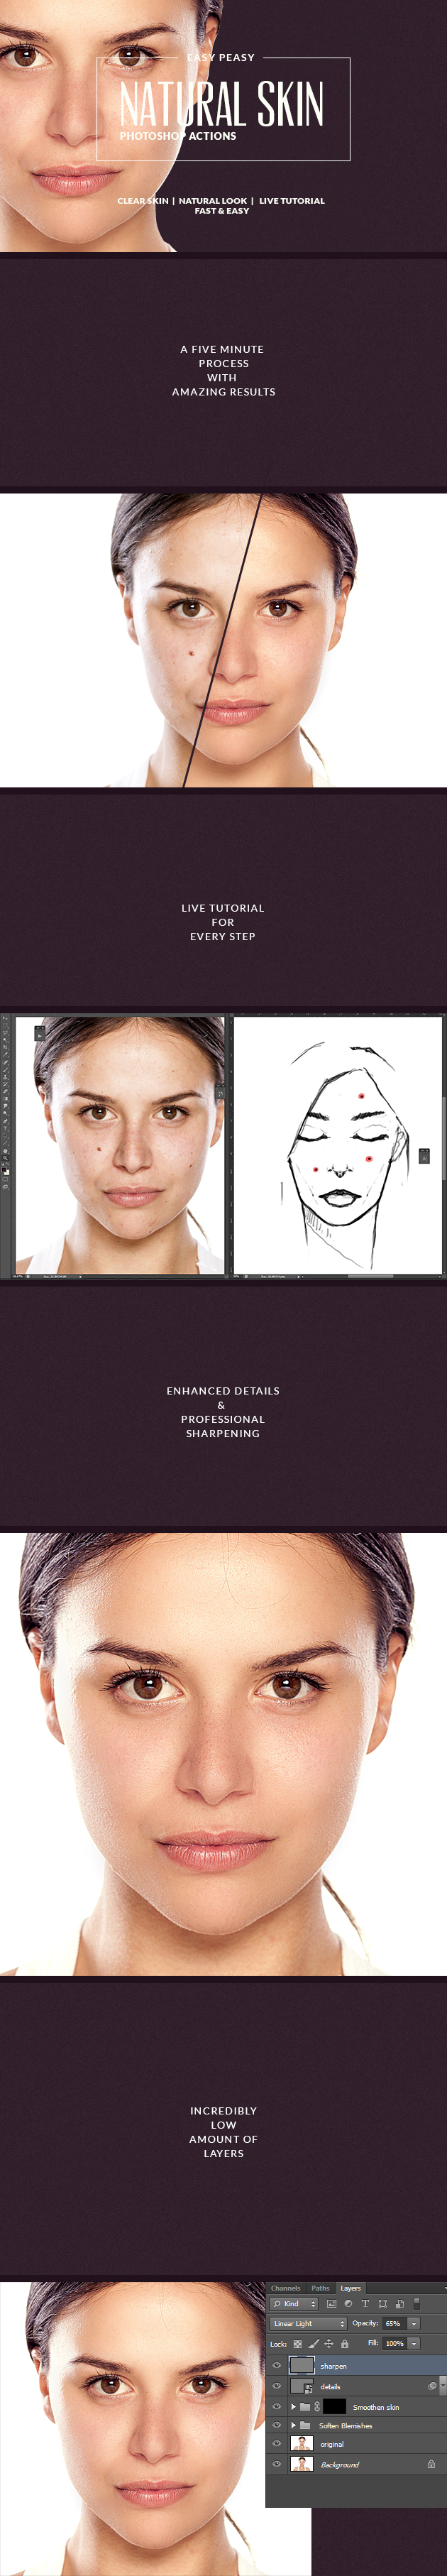 Get Flawless Skin with these Revolutionary Natural Skin PS Actions - Photoshop Resources Lorelei Web Design